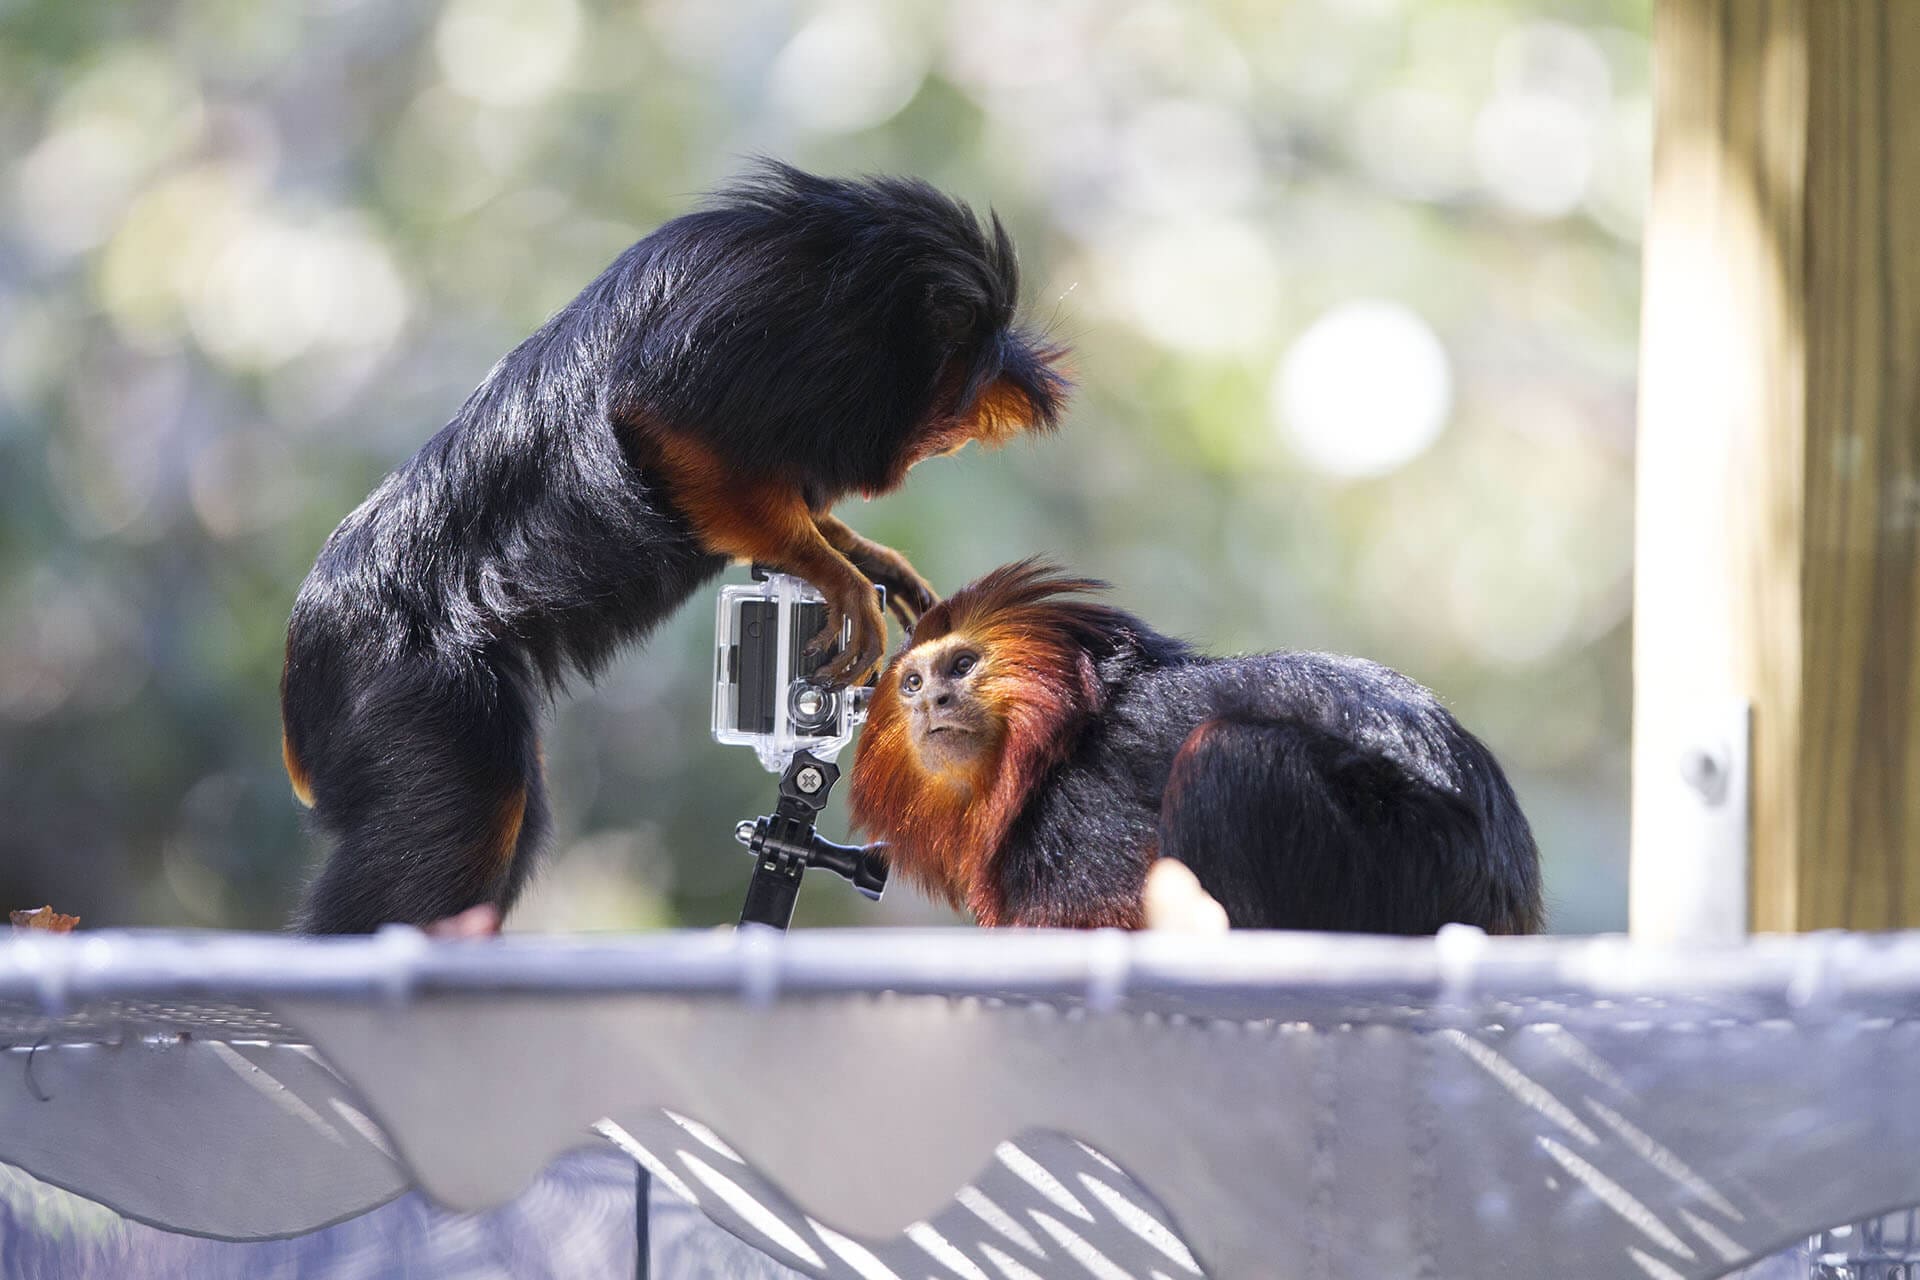 RWP ZOO WELCOMES A NEW GOLDEN LION TAMARIN BABY